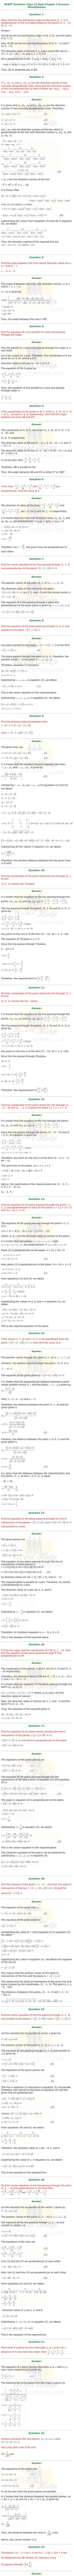 ncert solutions for class 12 Math Chapter 11 Miscellaneous 